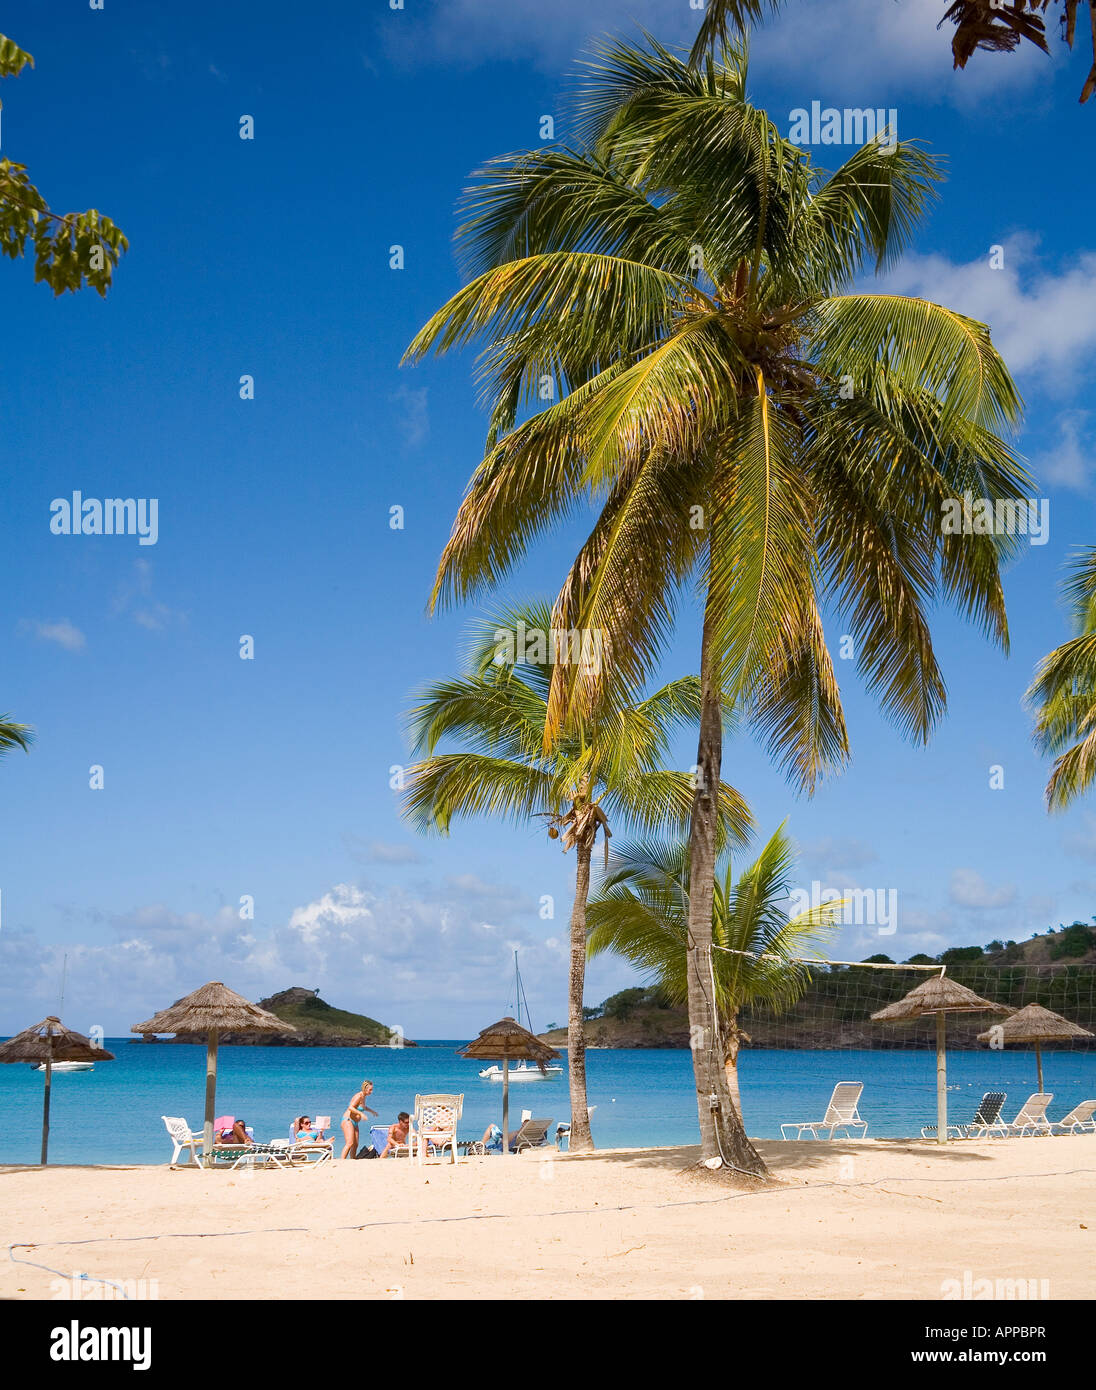 The Beach at the Hotel Royal Antiguan in the Caribbean island of Antigua Stock Photo